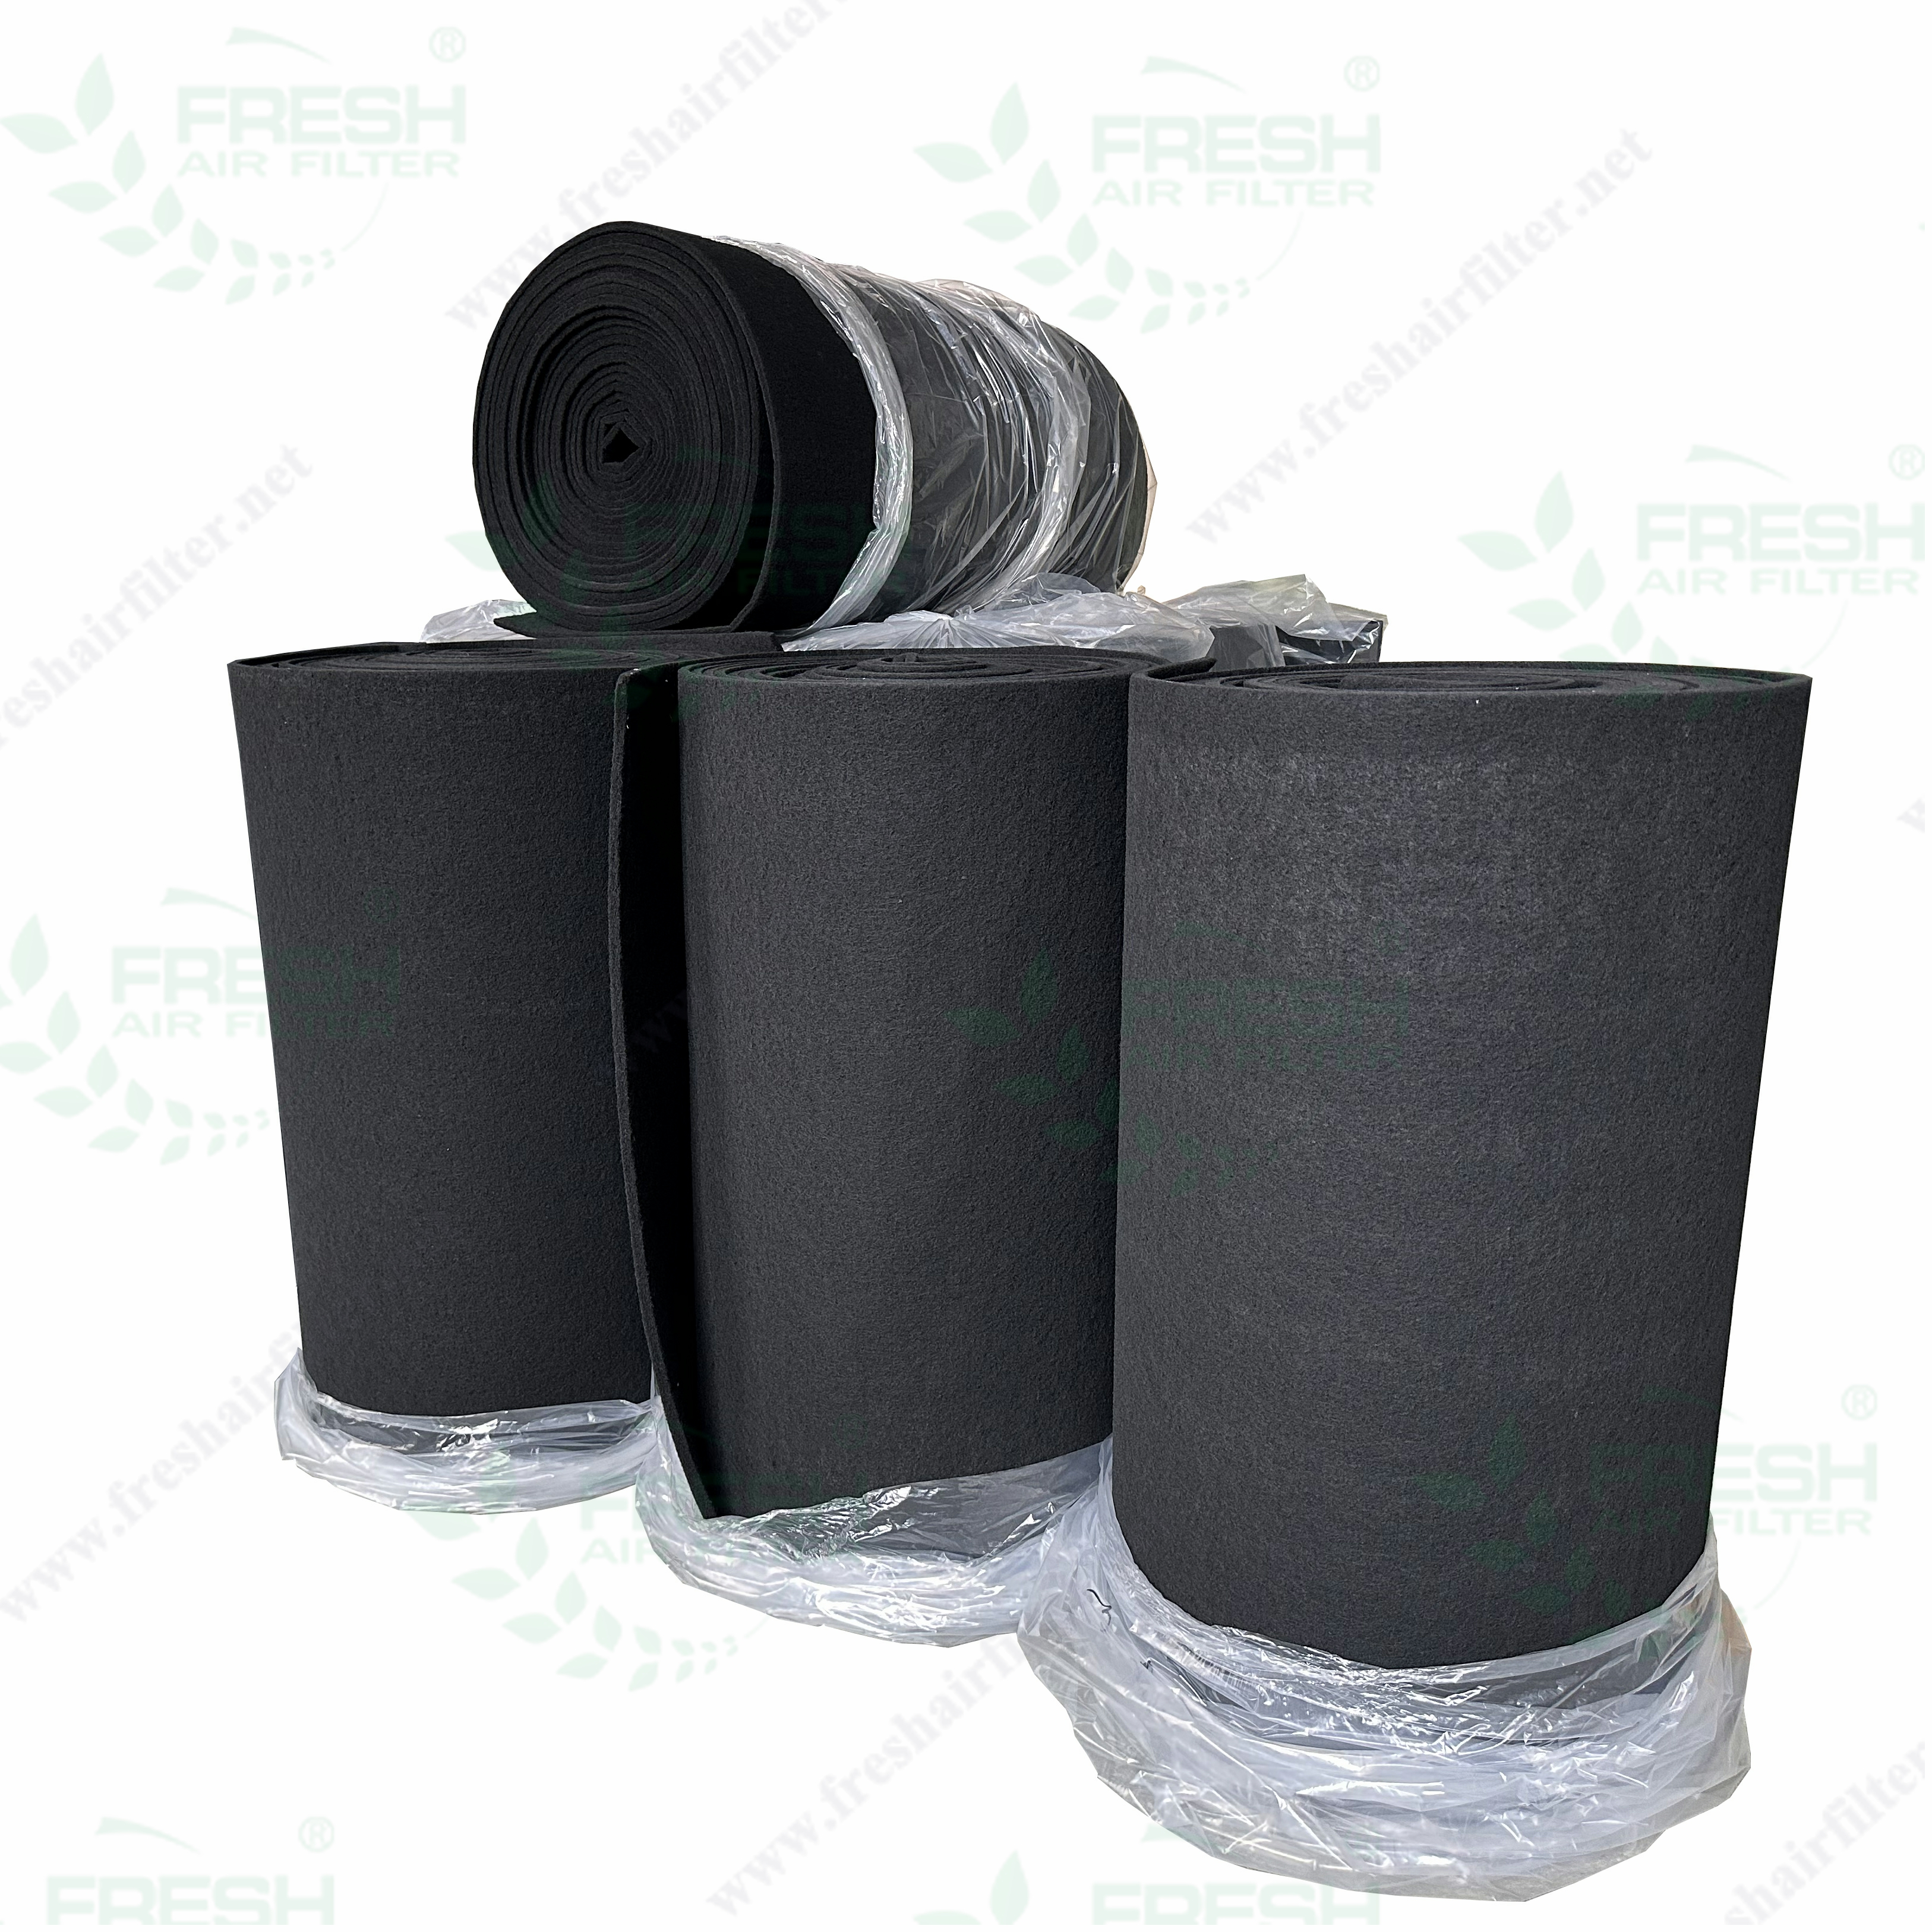 Activated carbon filter media (14)